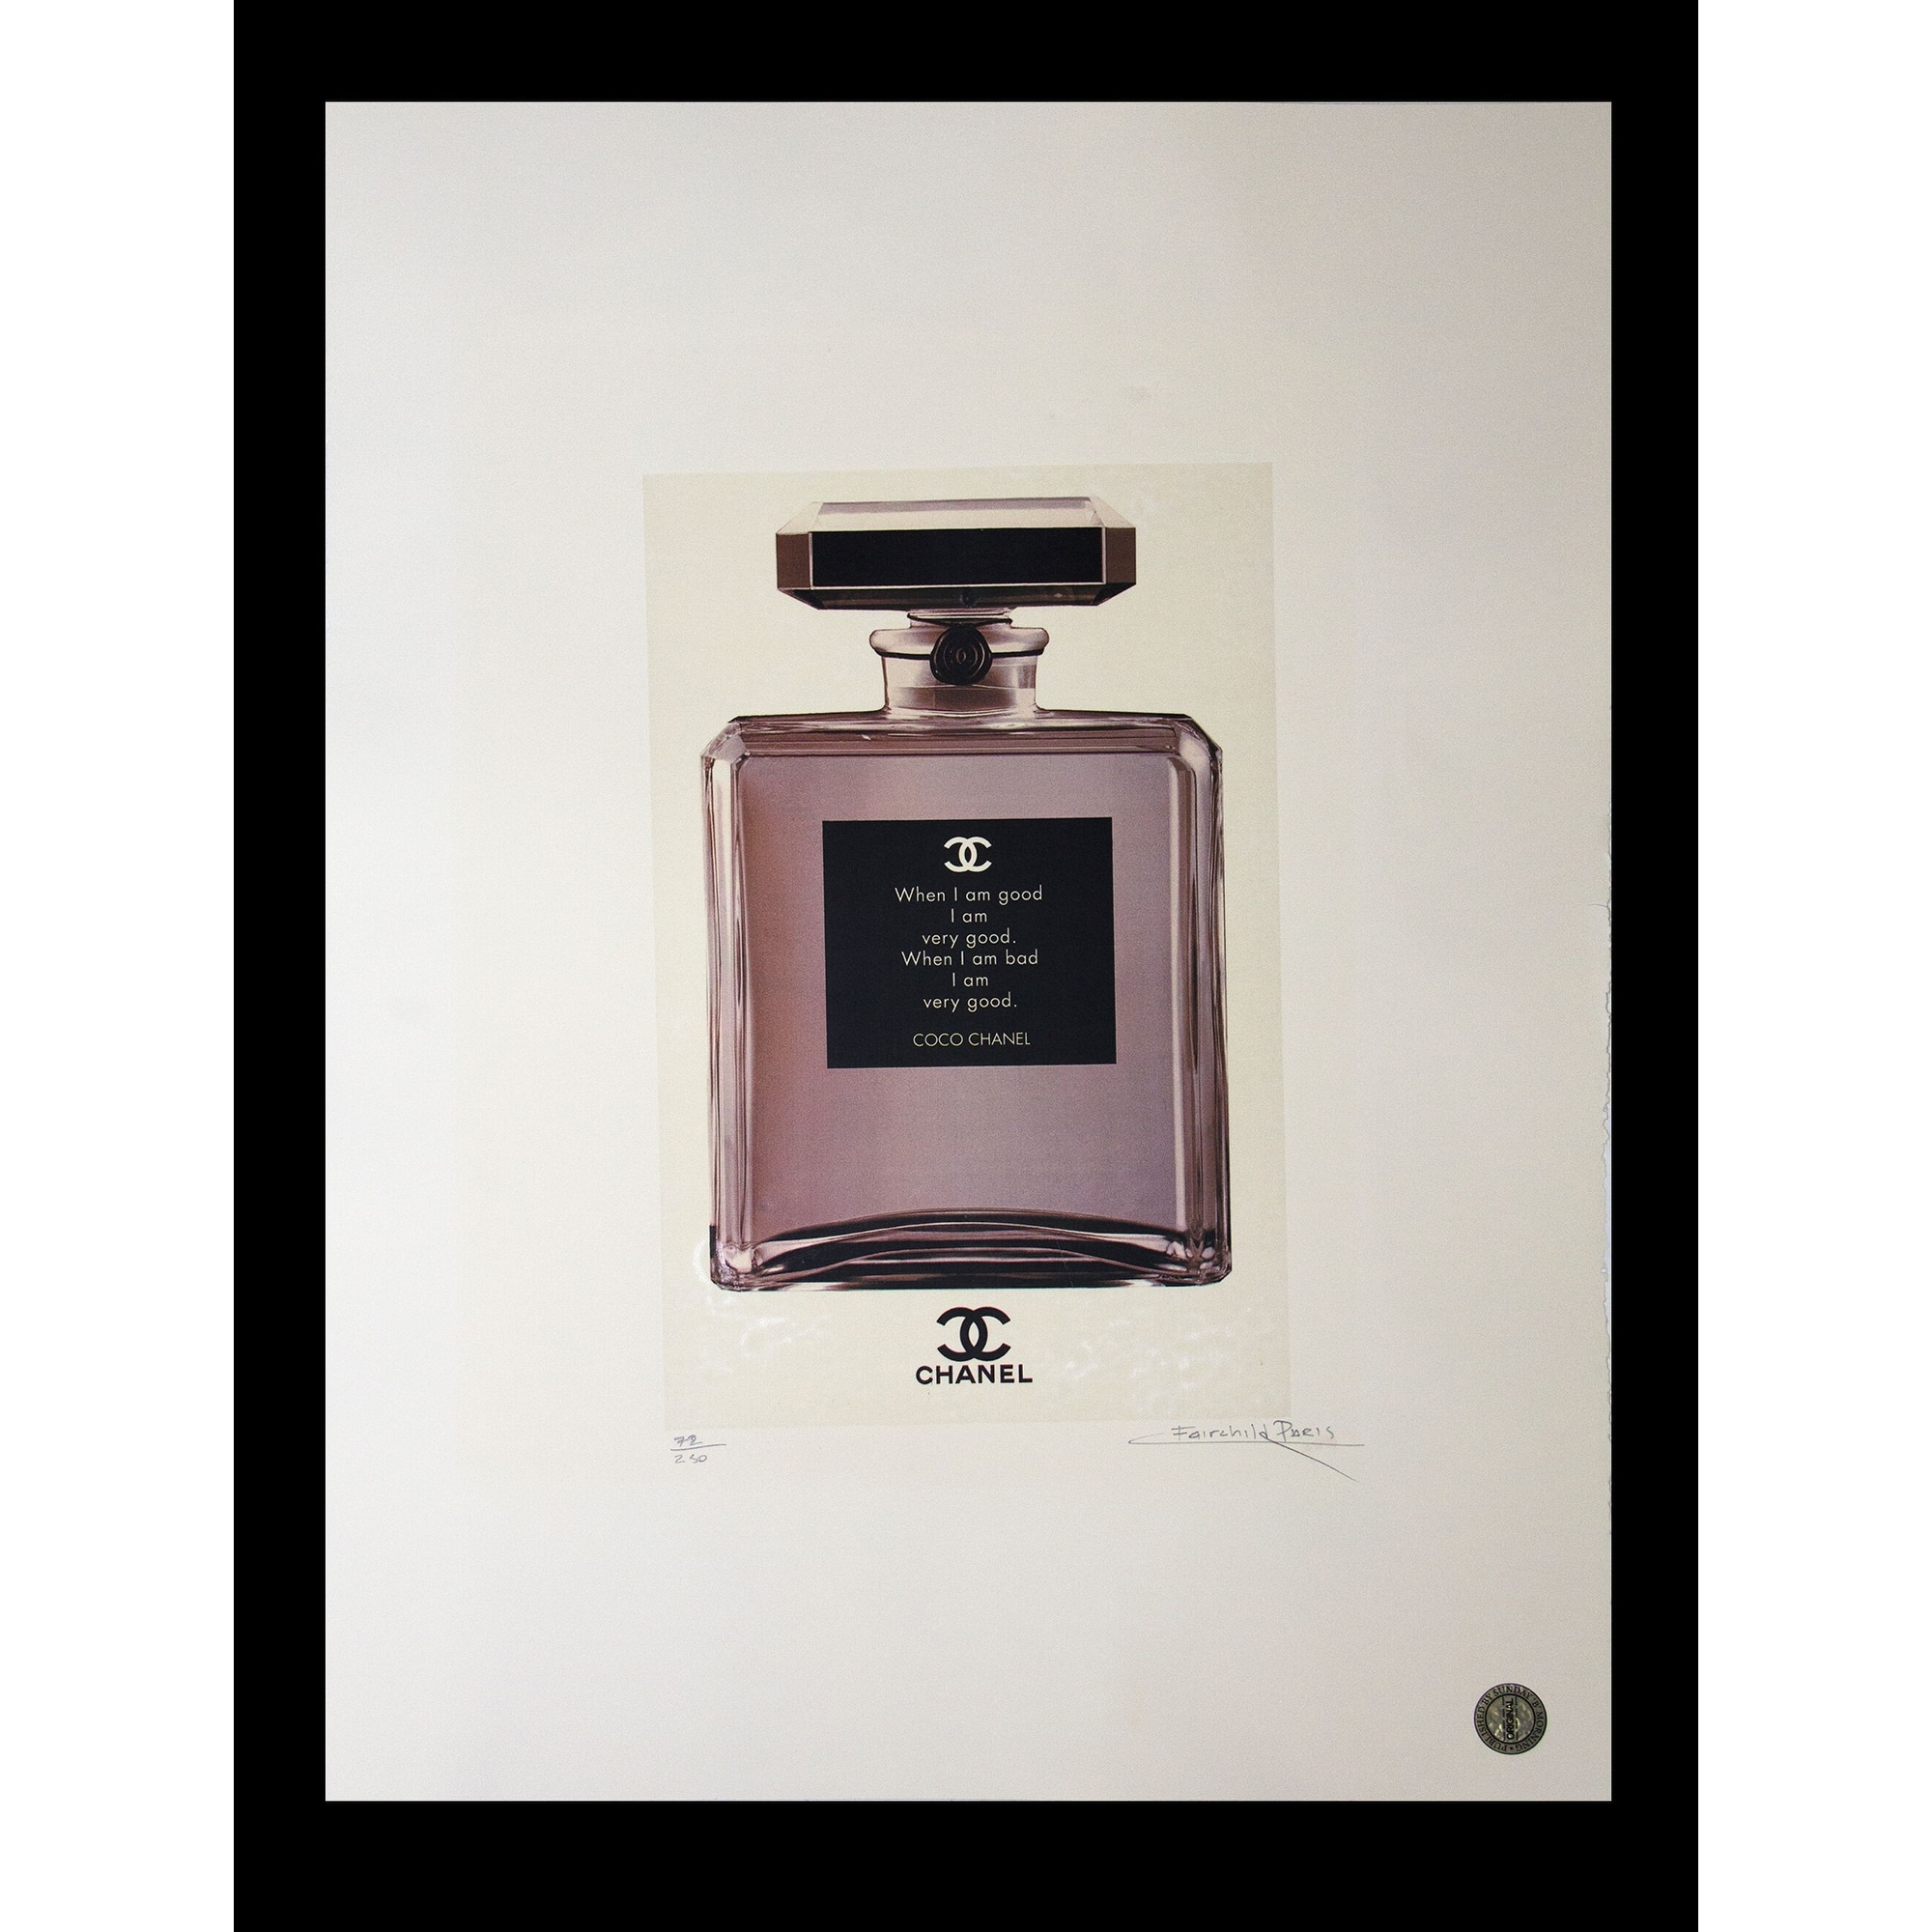 Fairchild Paris Printed Chanel No. 5 Bottle with Coco Chanel Quote